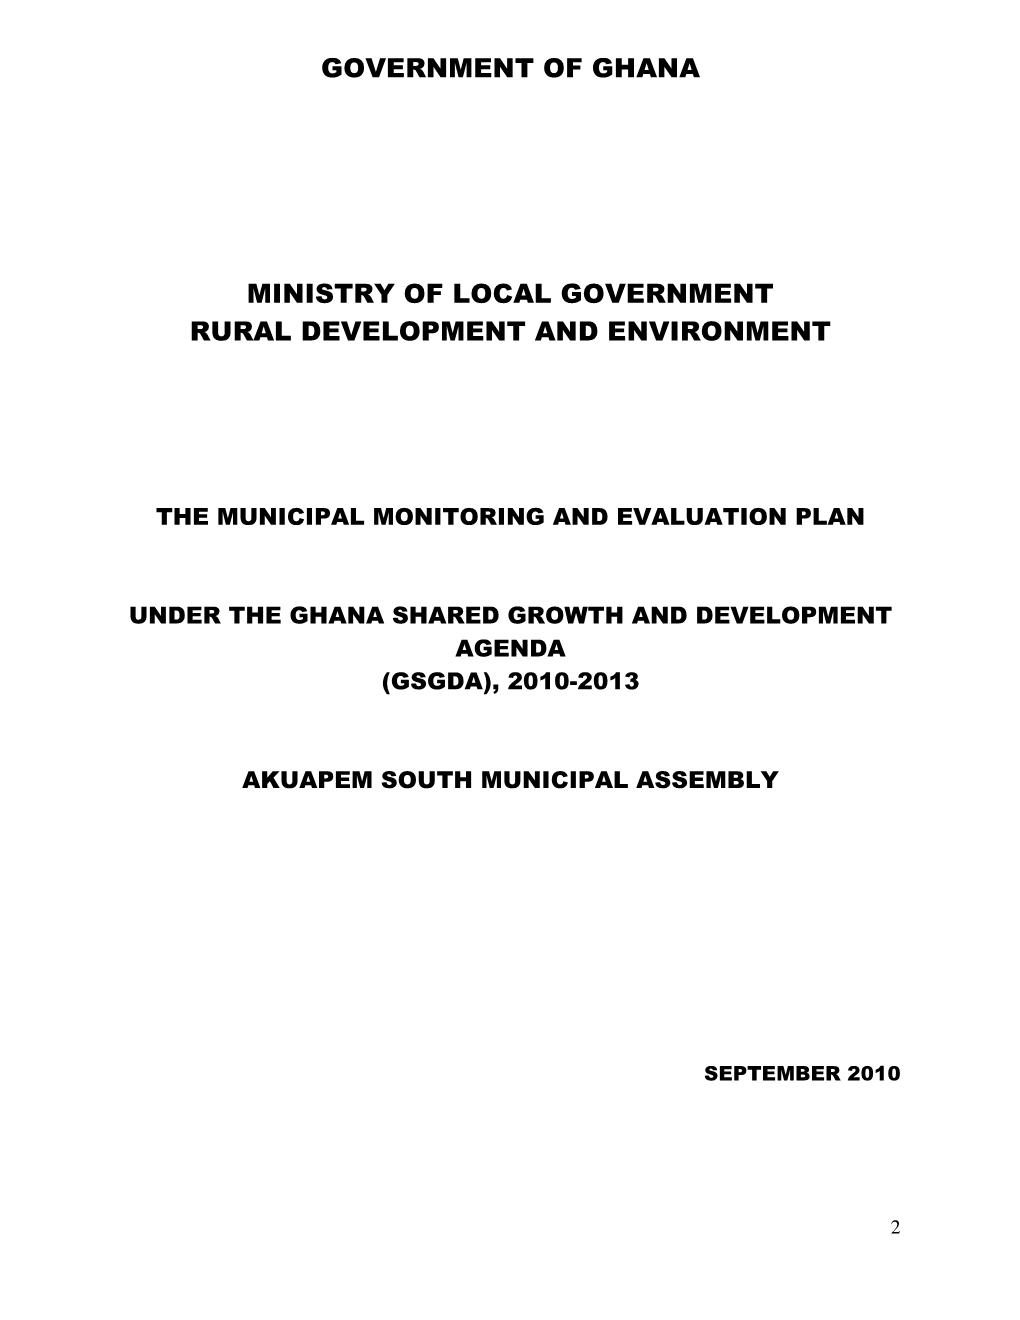 Government of Ghana Ministry of Local Government Rural Development And